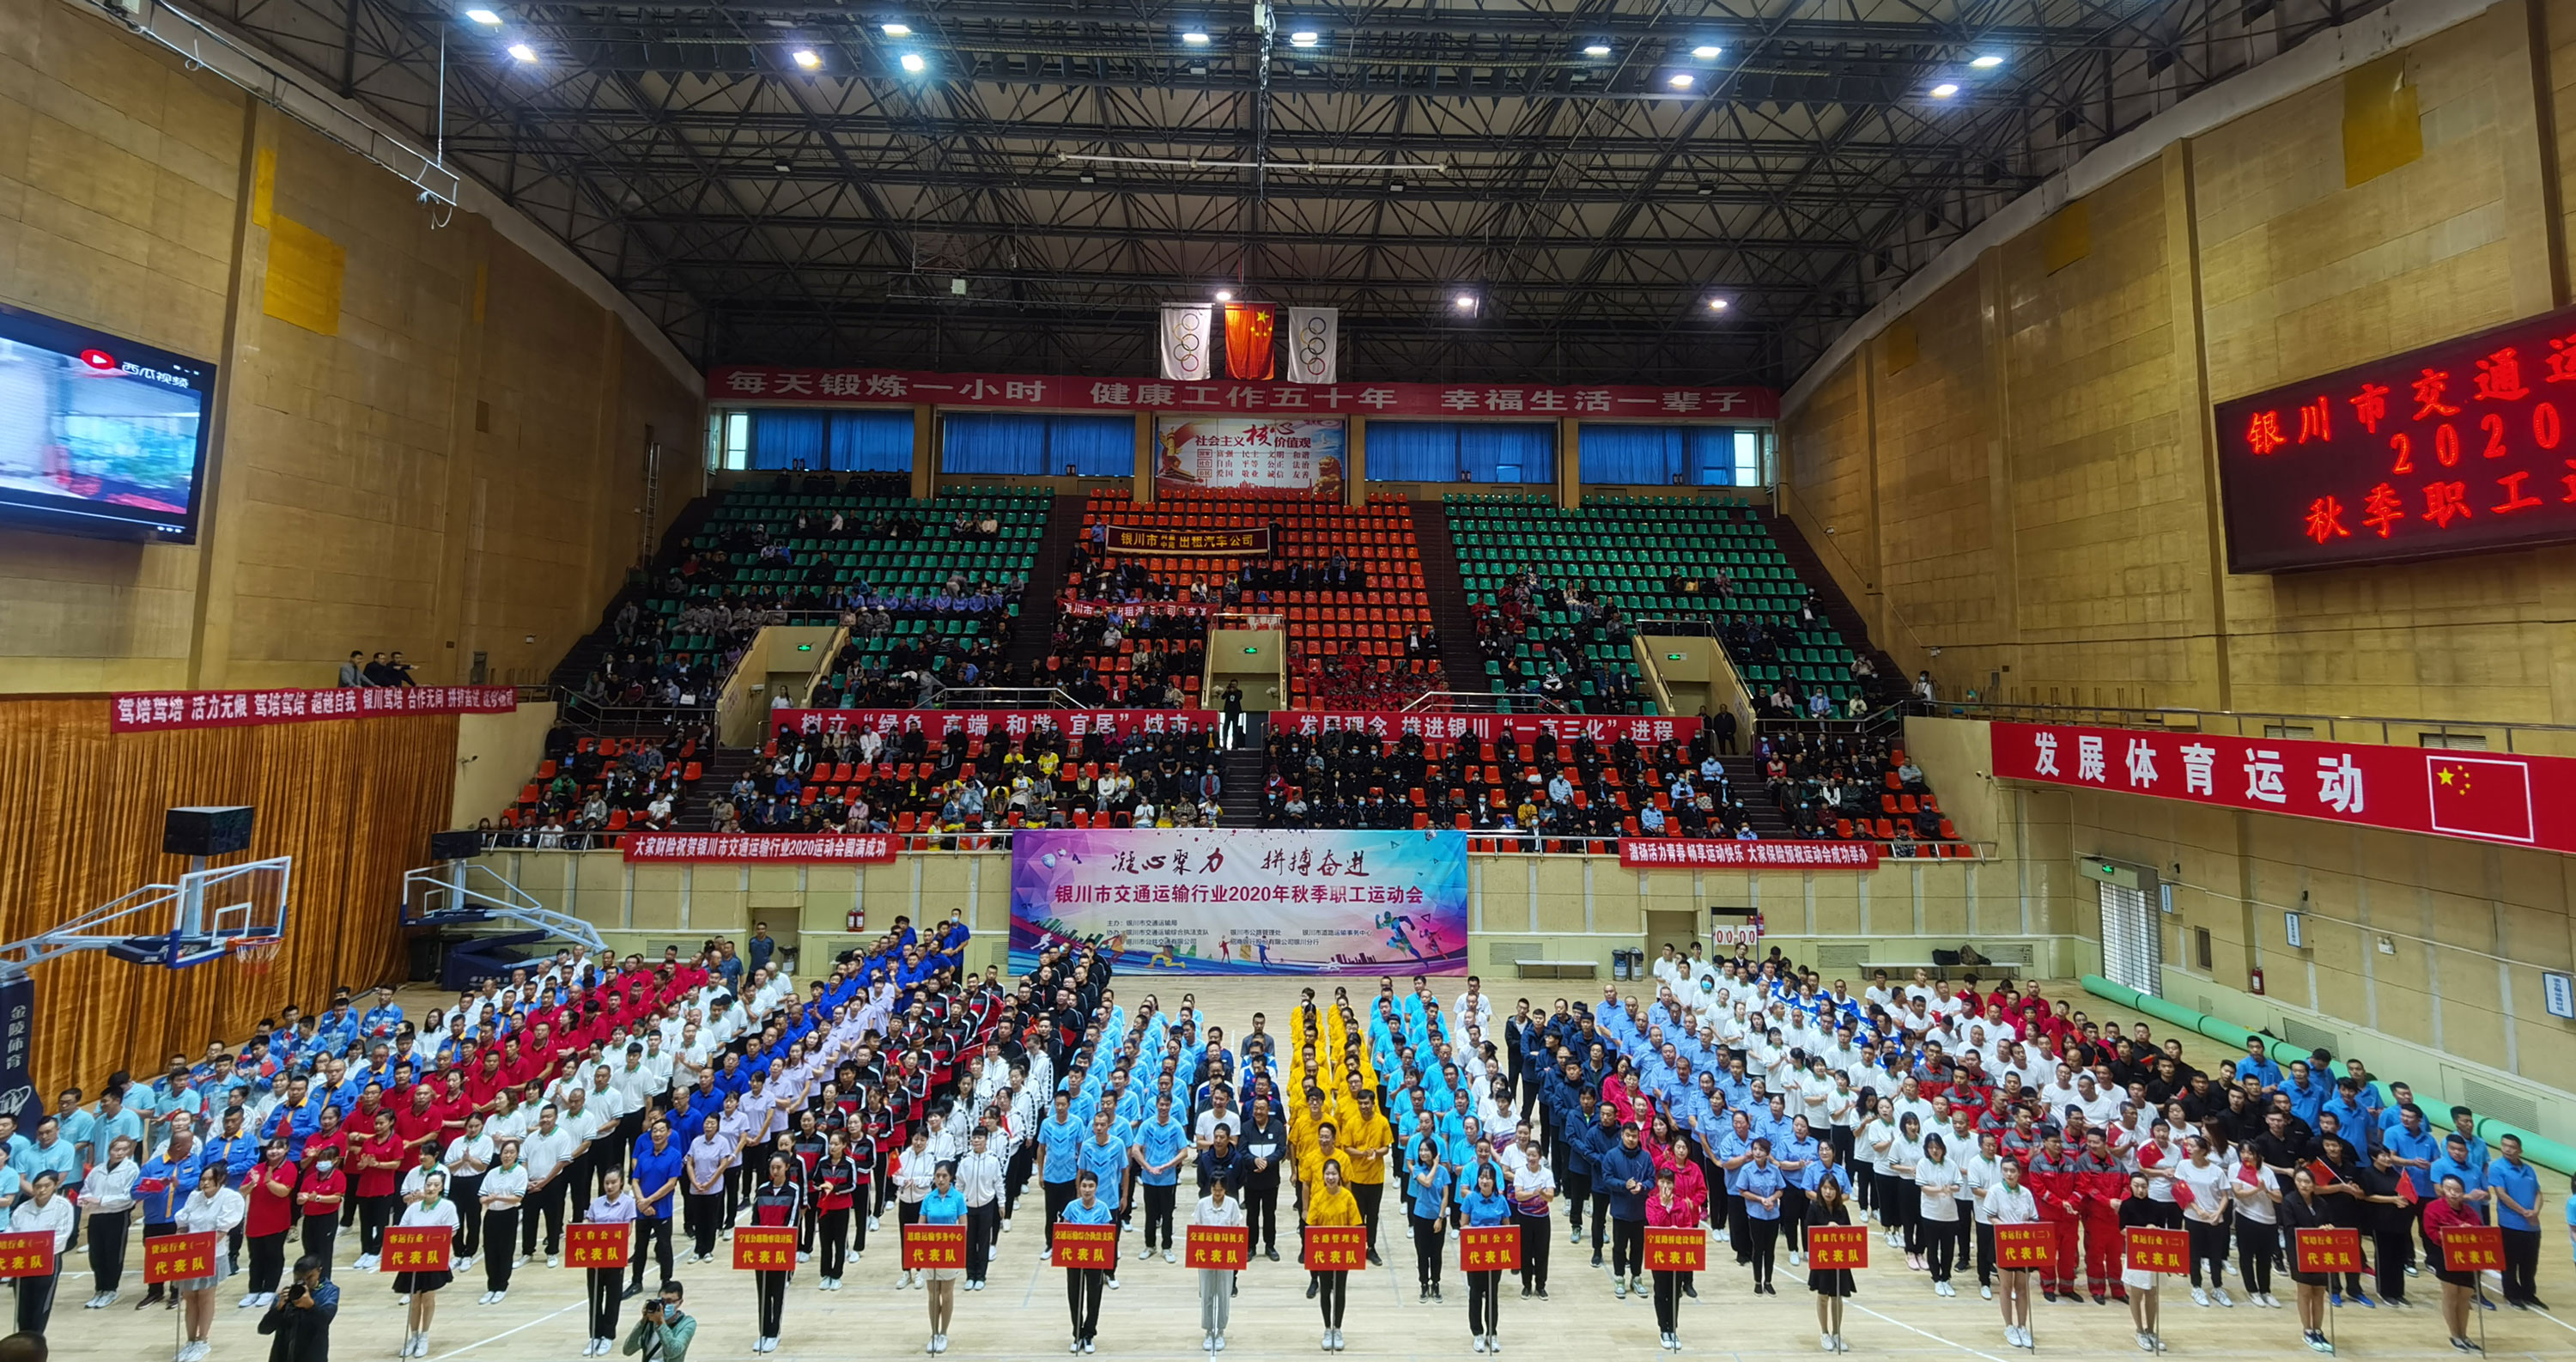 Hanas logistics participated in the autumn games of Yinchuan transportation industry